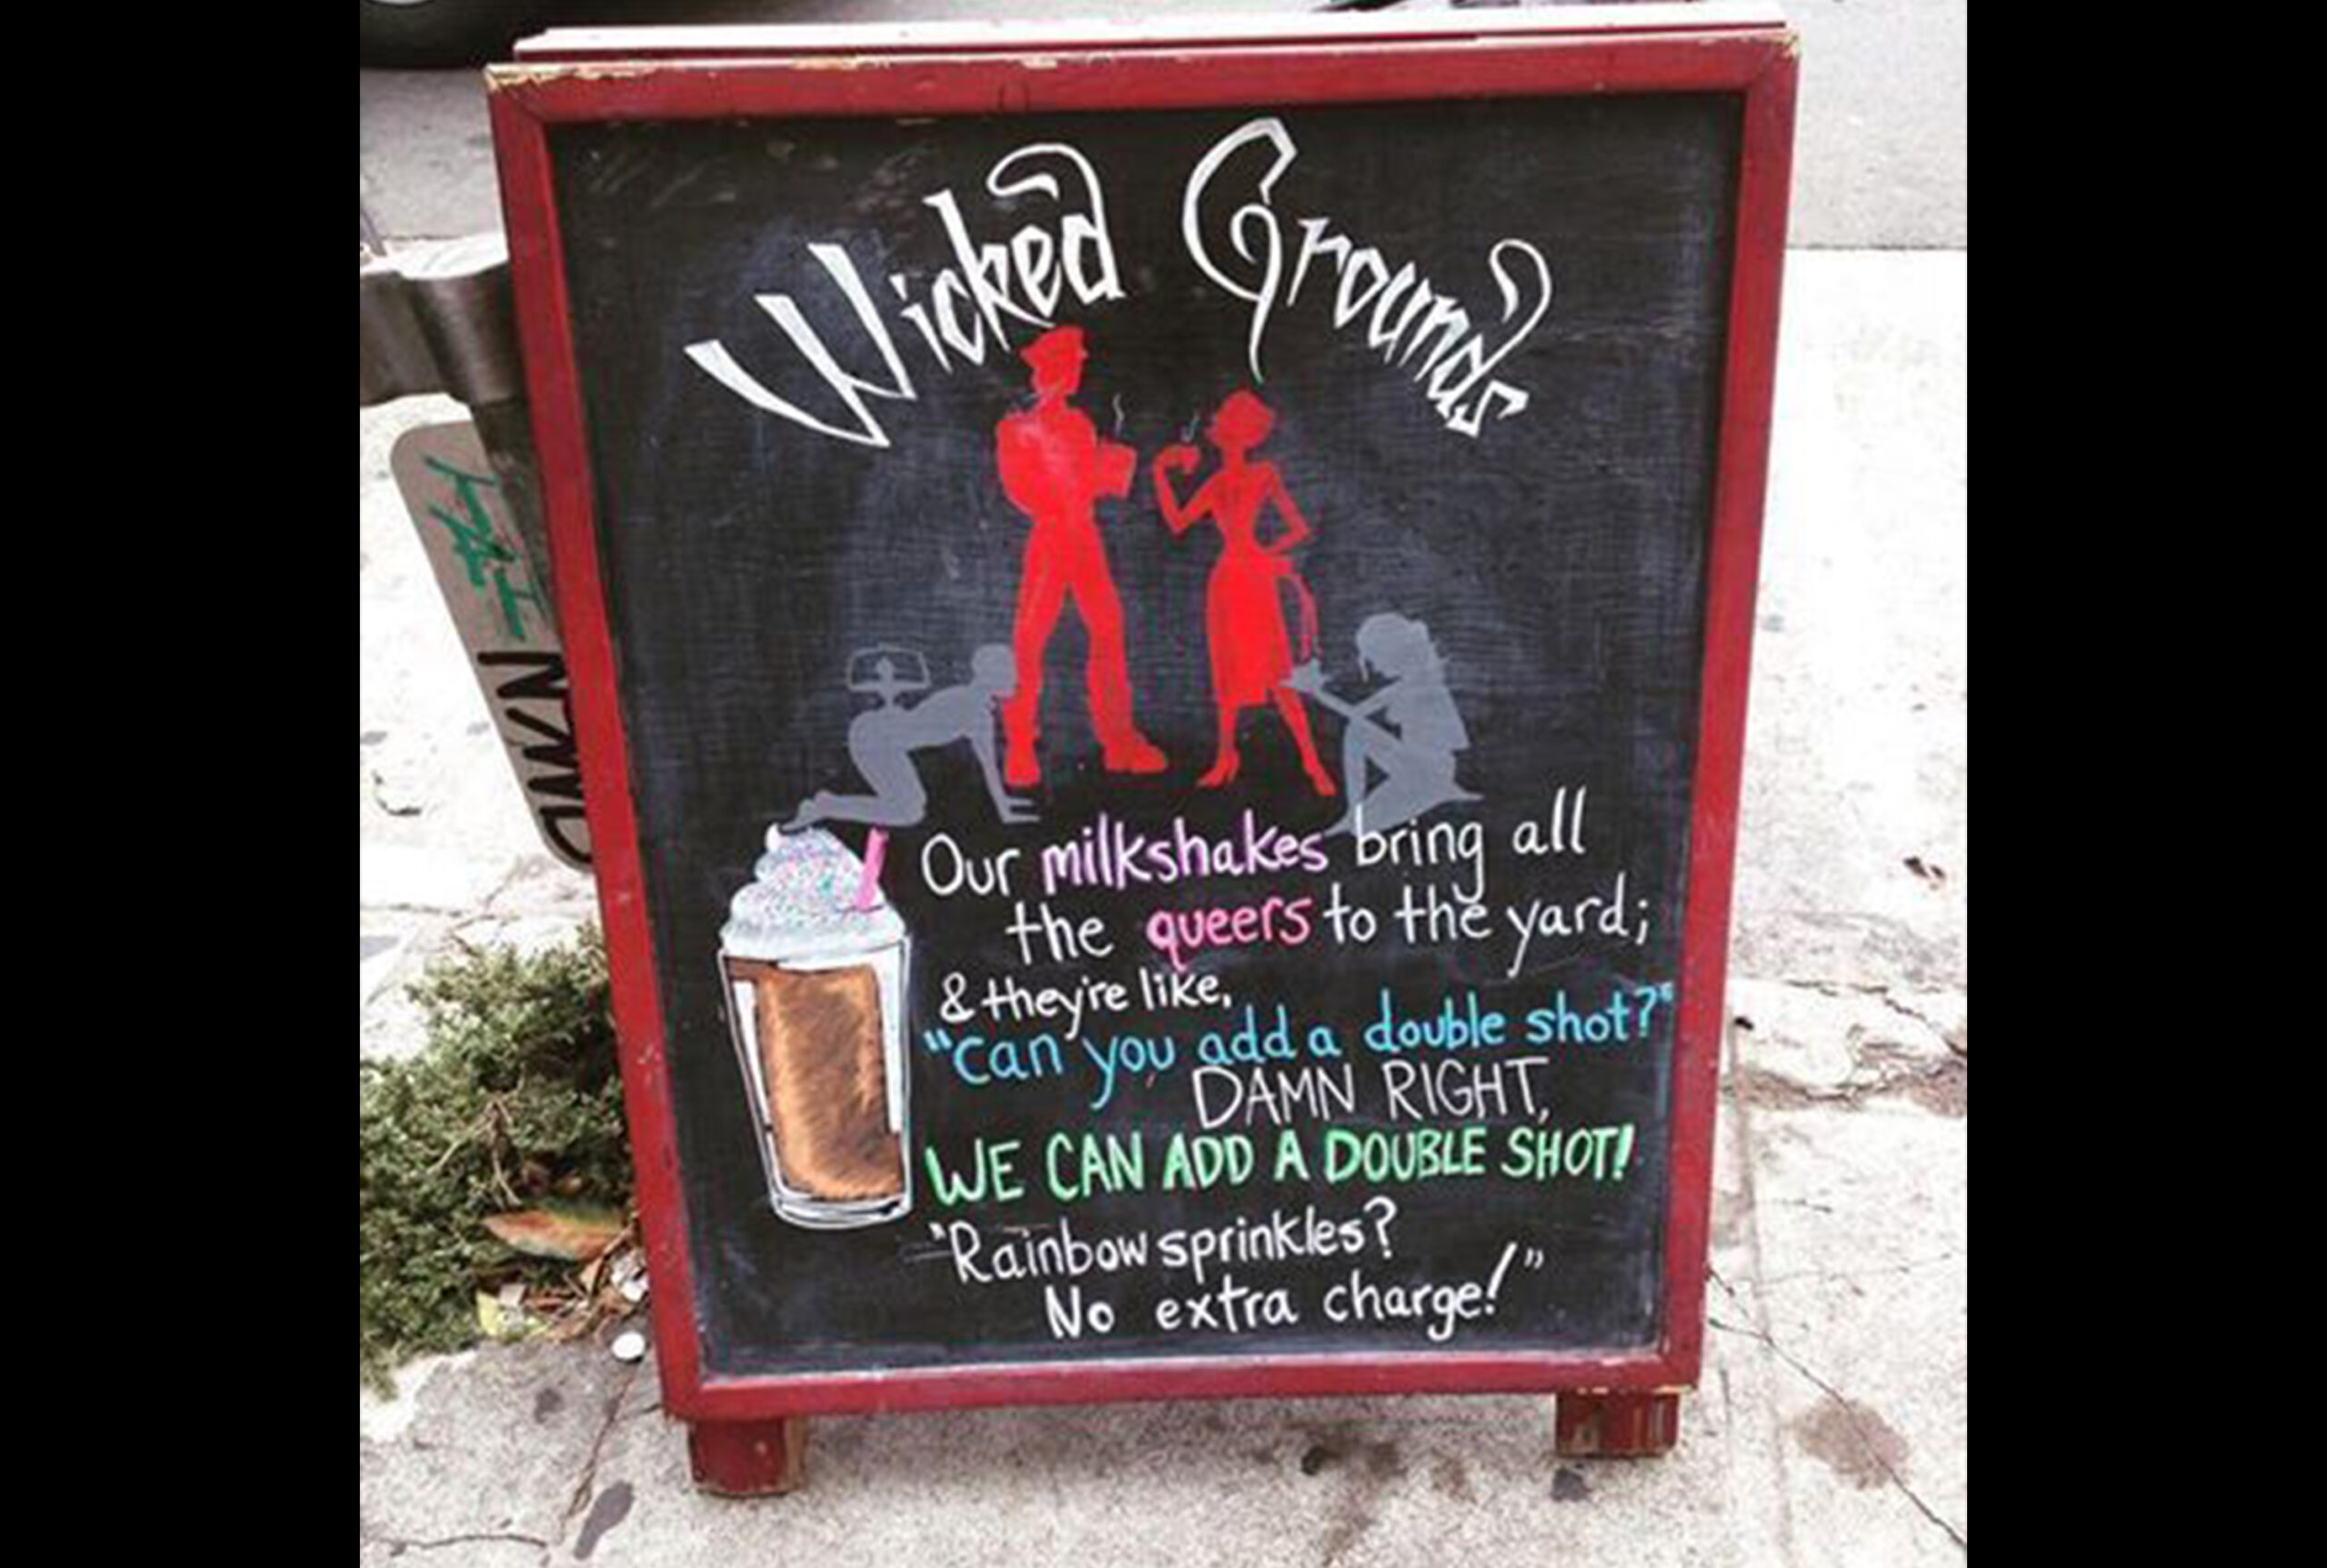 Sex Ed and Coffee: San Francisco’s Wicked Grounds Closes Cafe